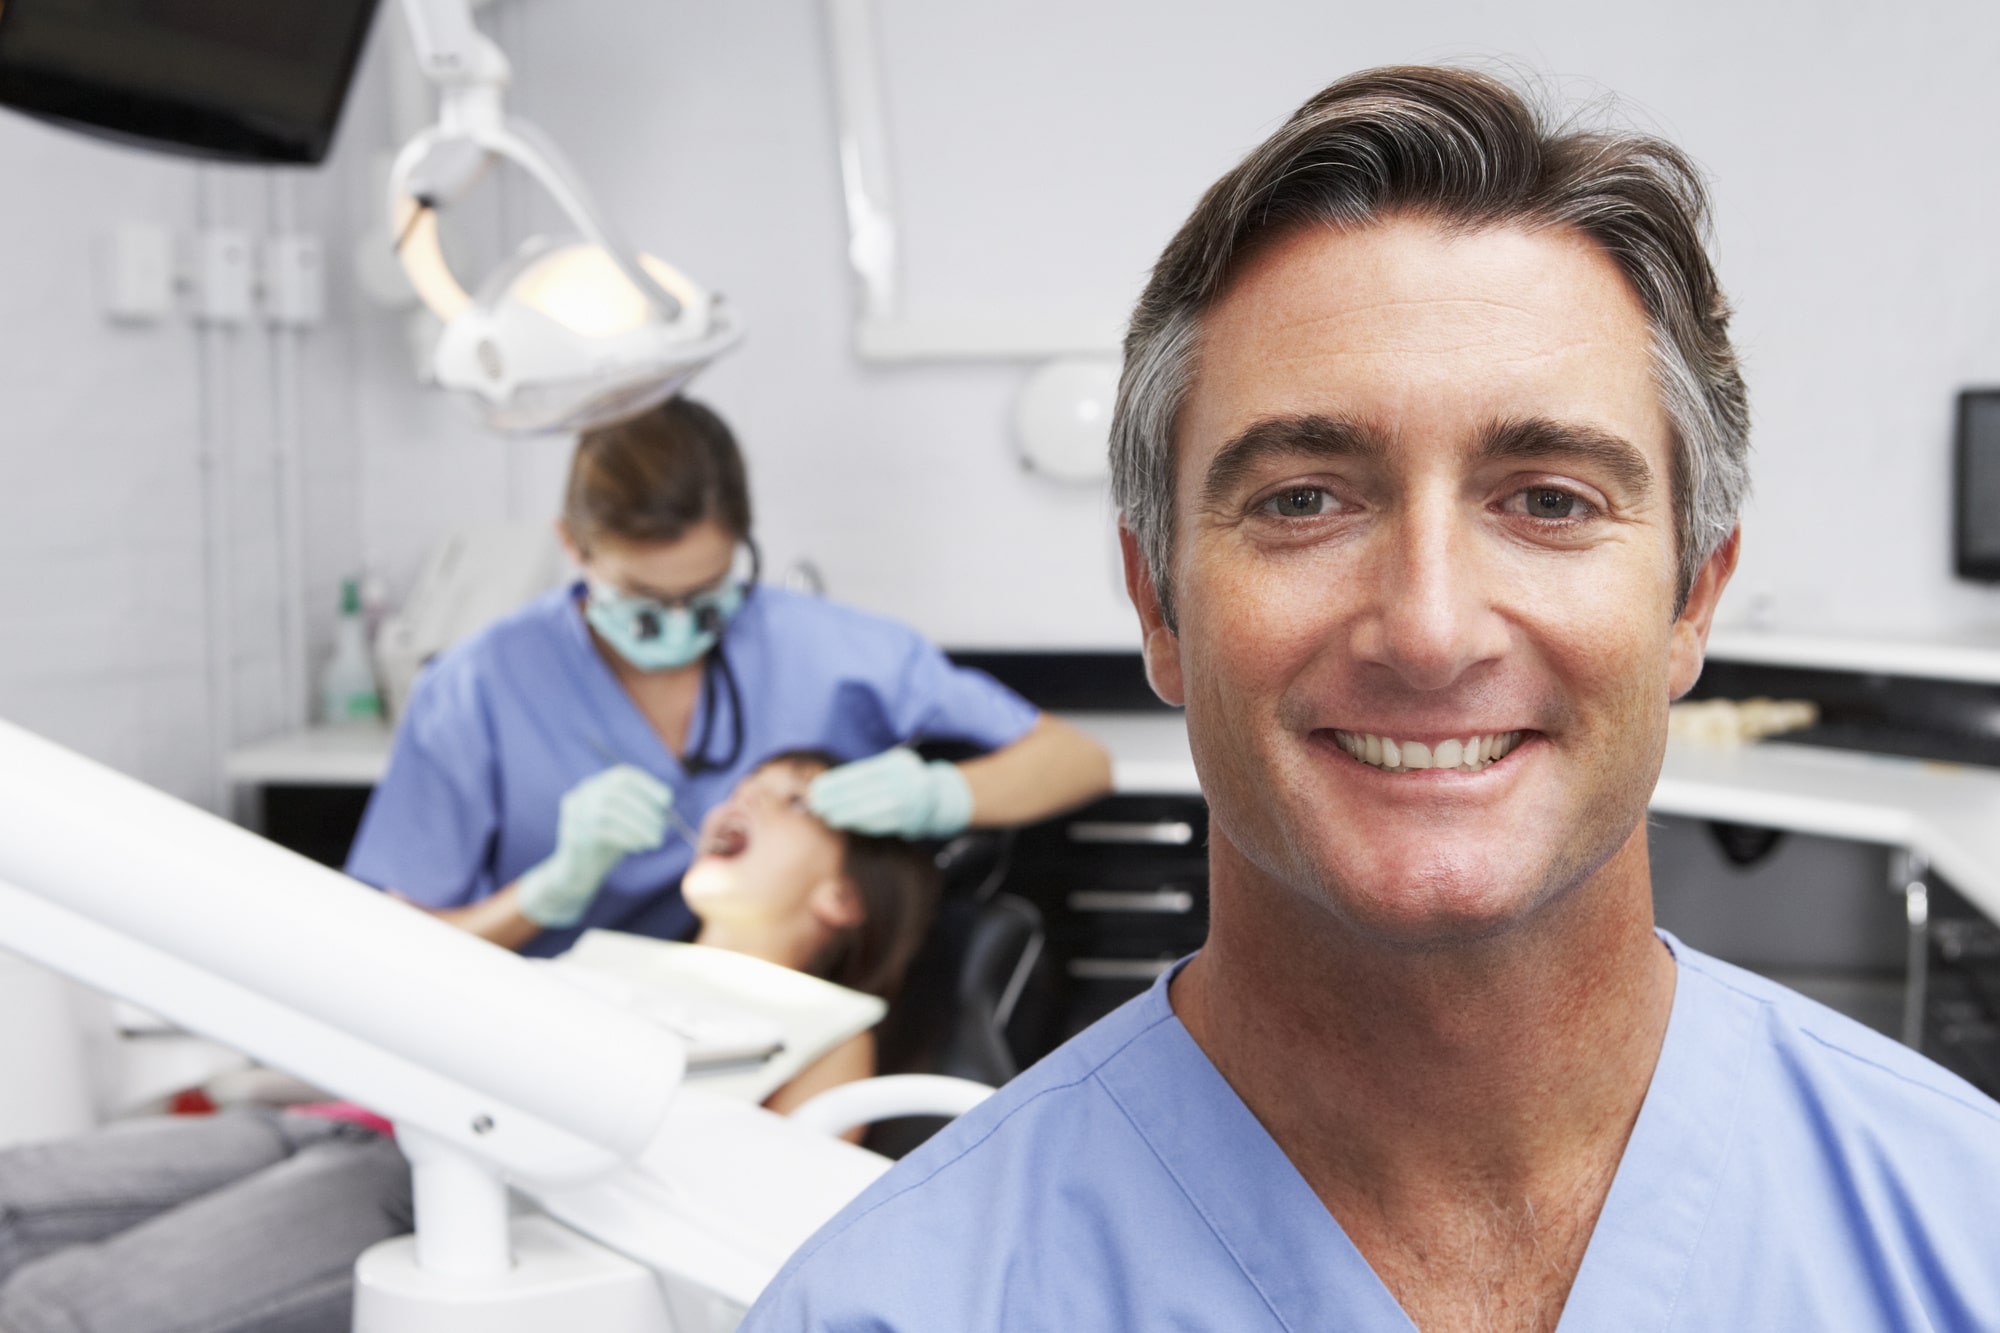 dentist with patient and technician in background